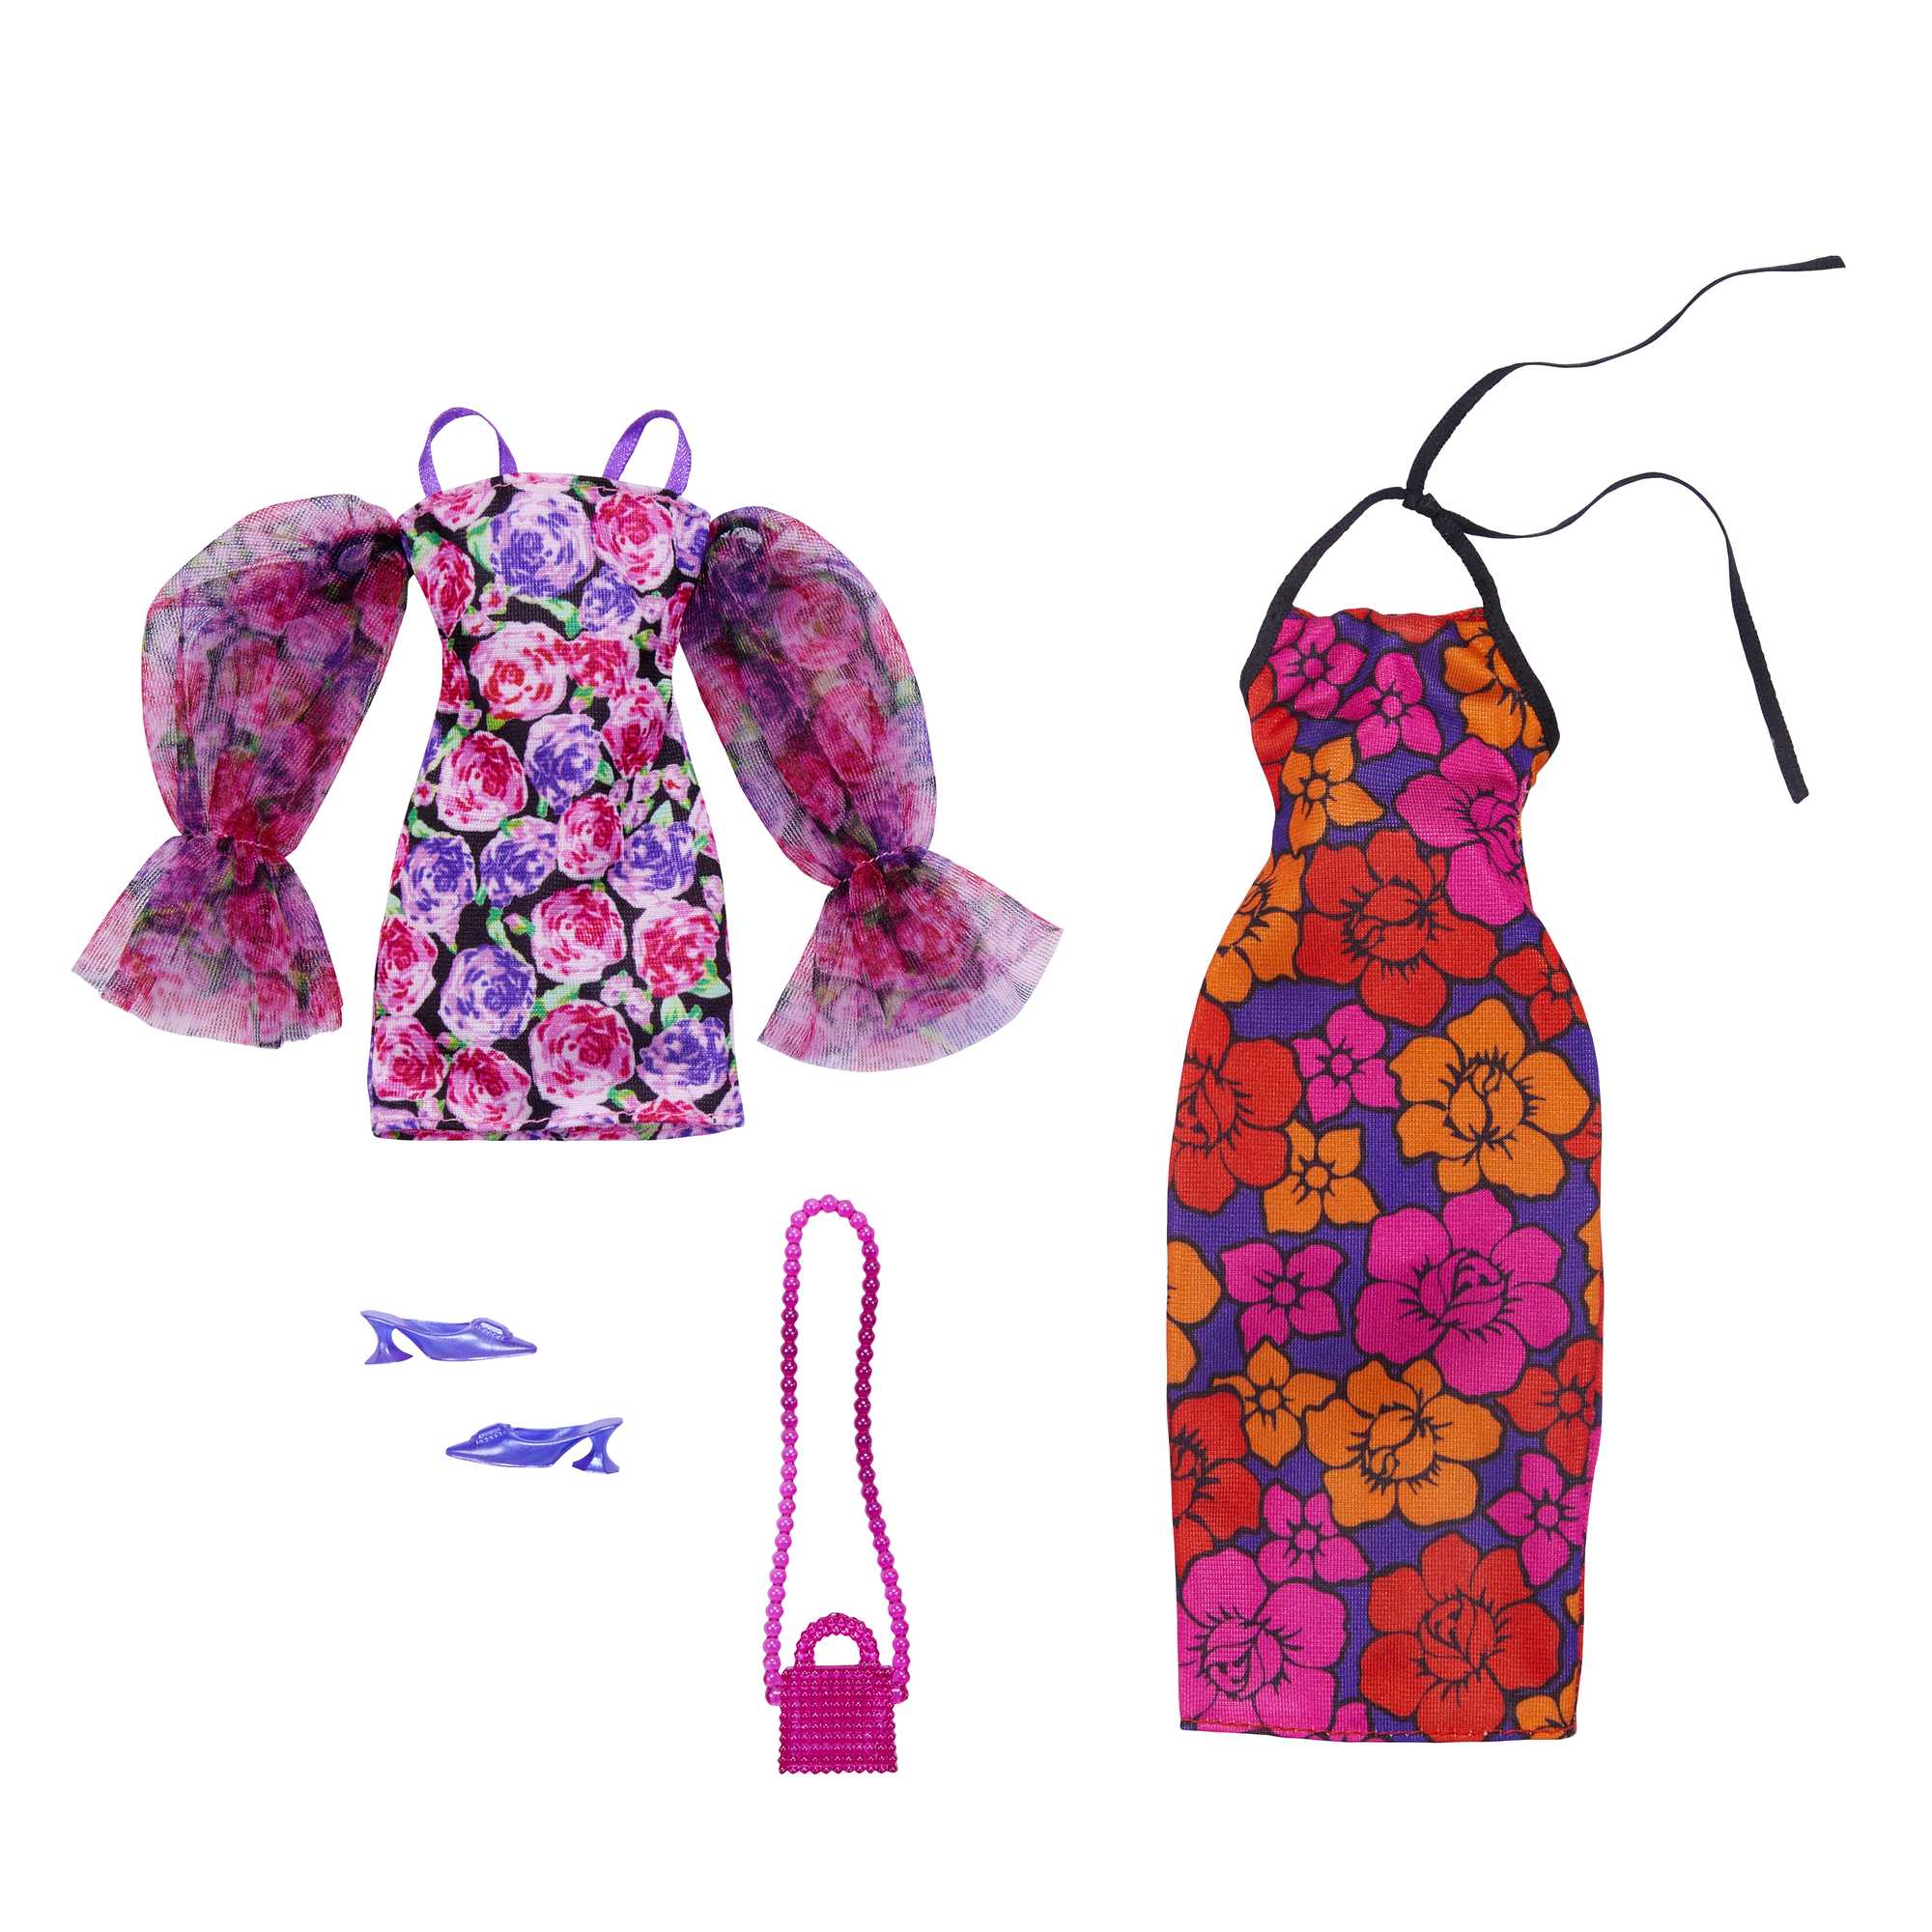 Barbie Clothes and Accessories | Floral Theme | MATTEL